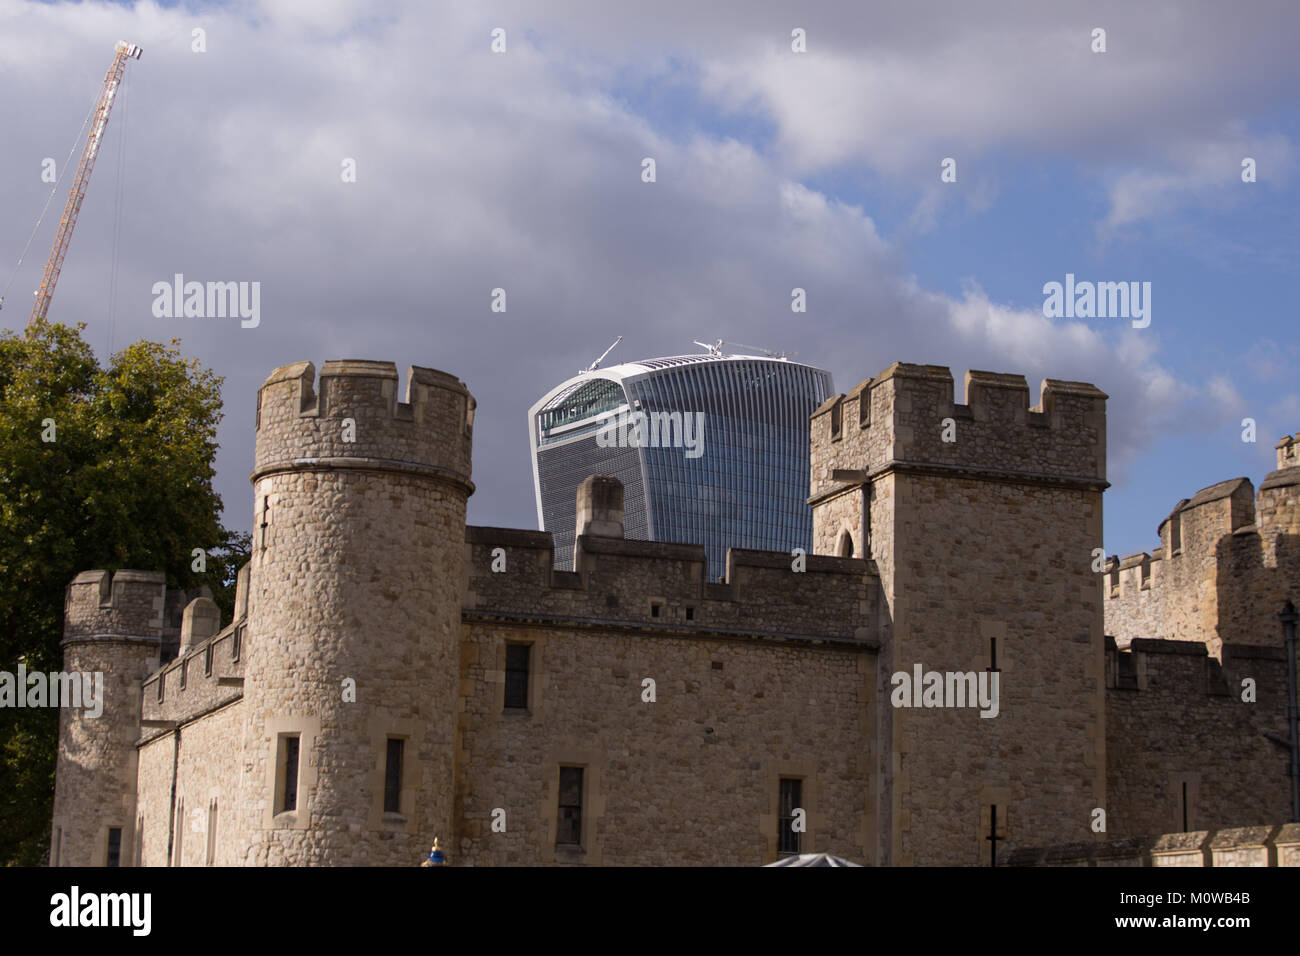 The Tower of London being overlooked by the Walkie-Talkie Building, 20 Fenchurch Street, City of London Stock Photo